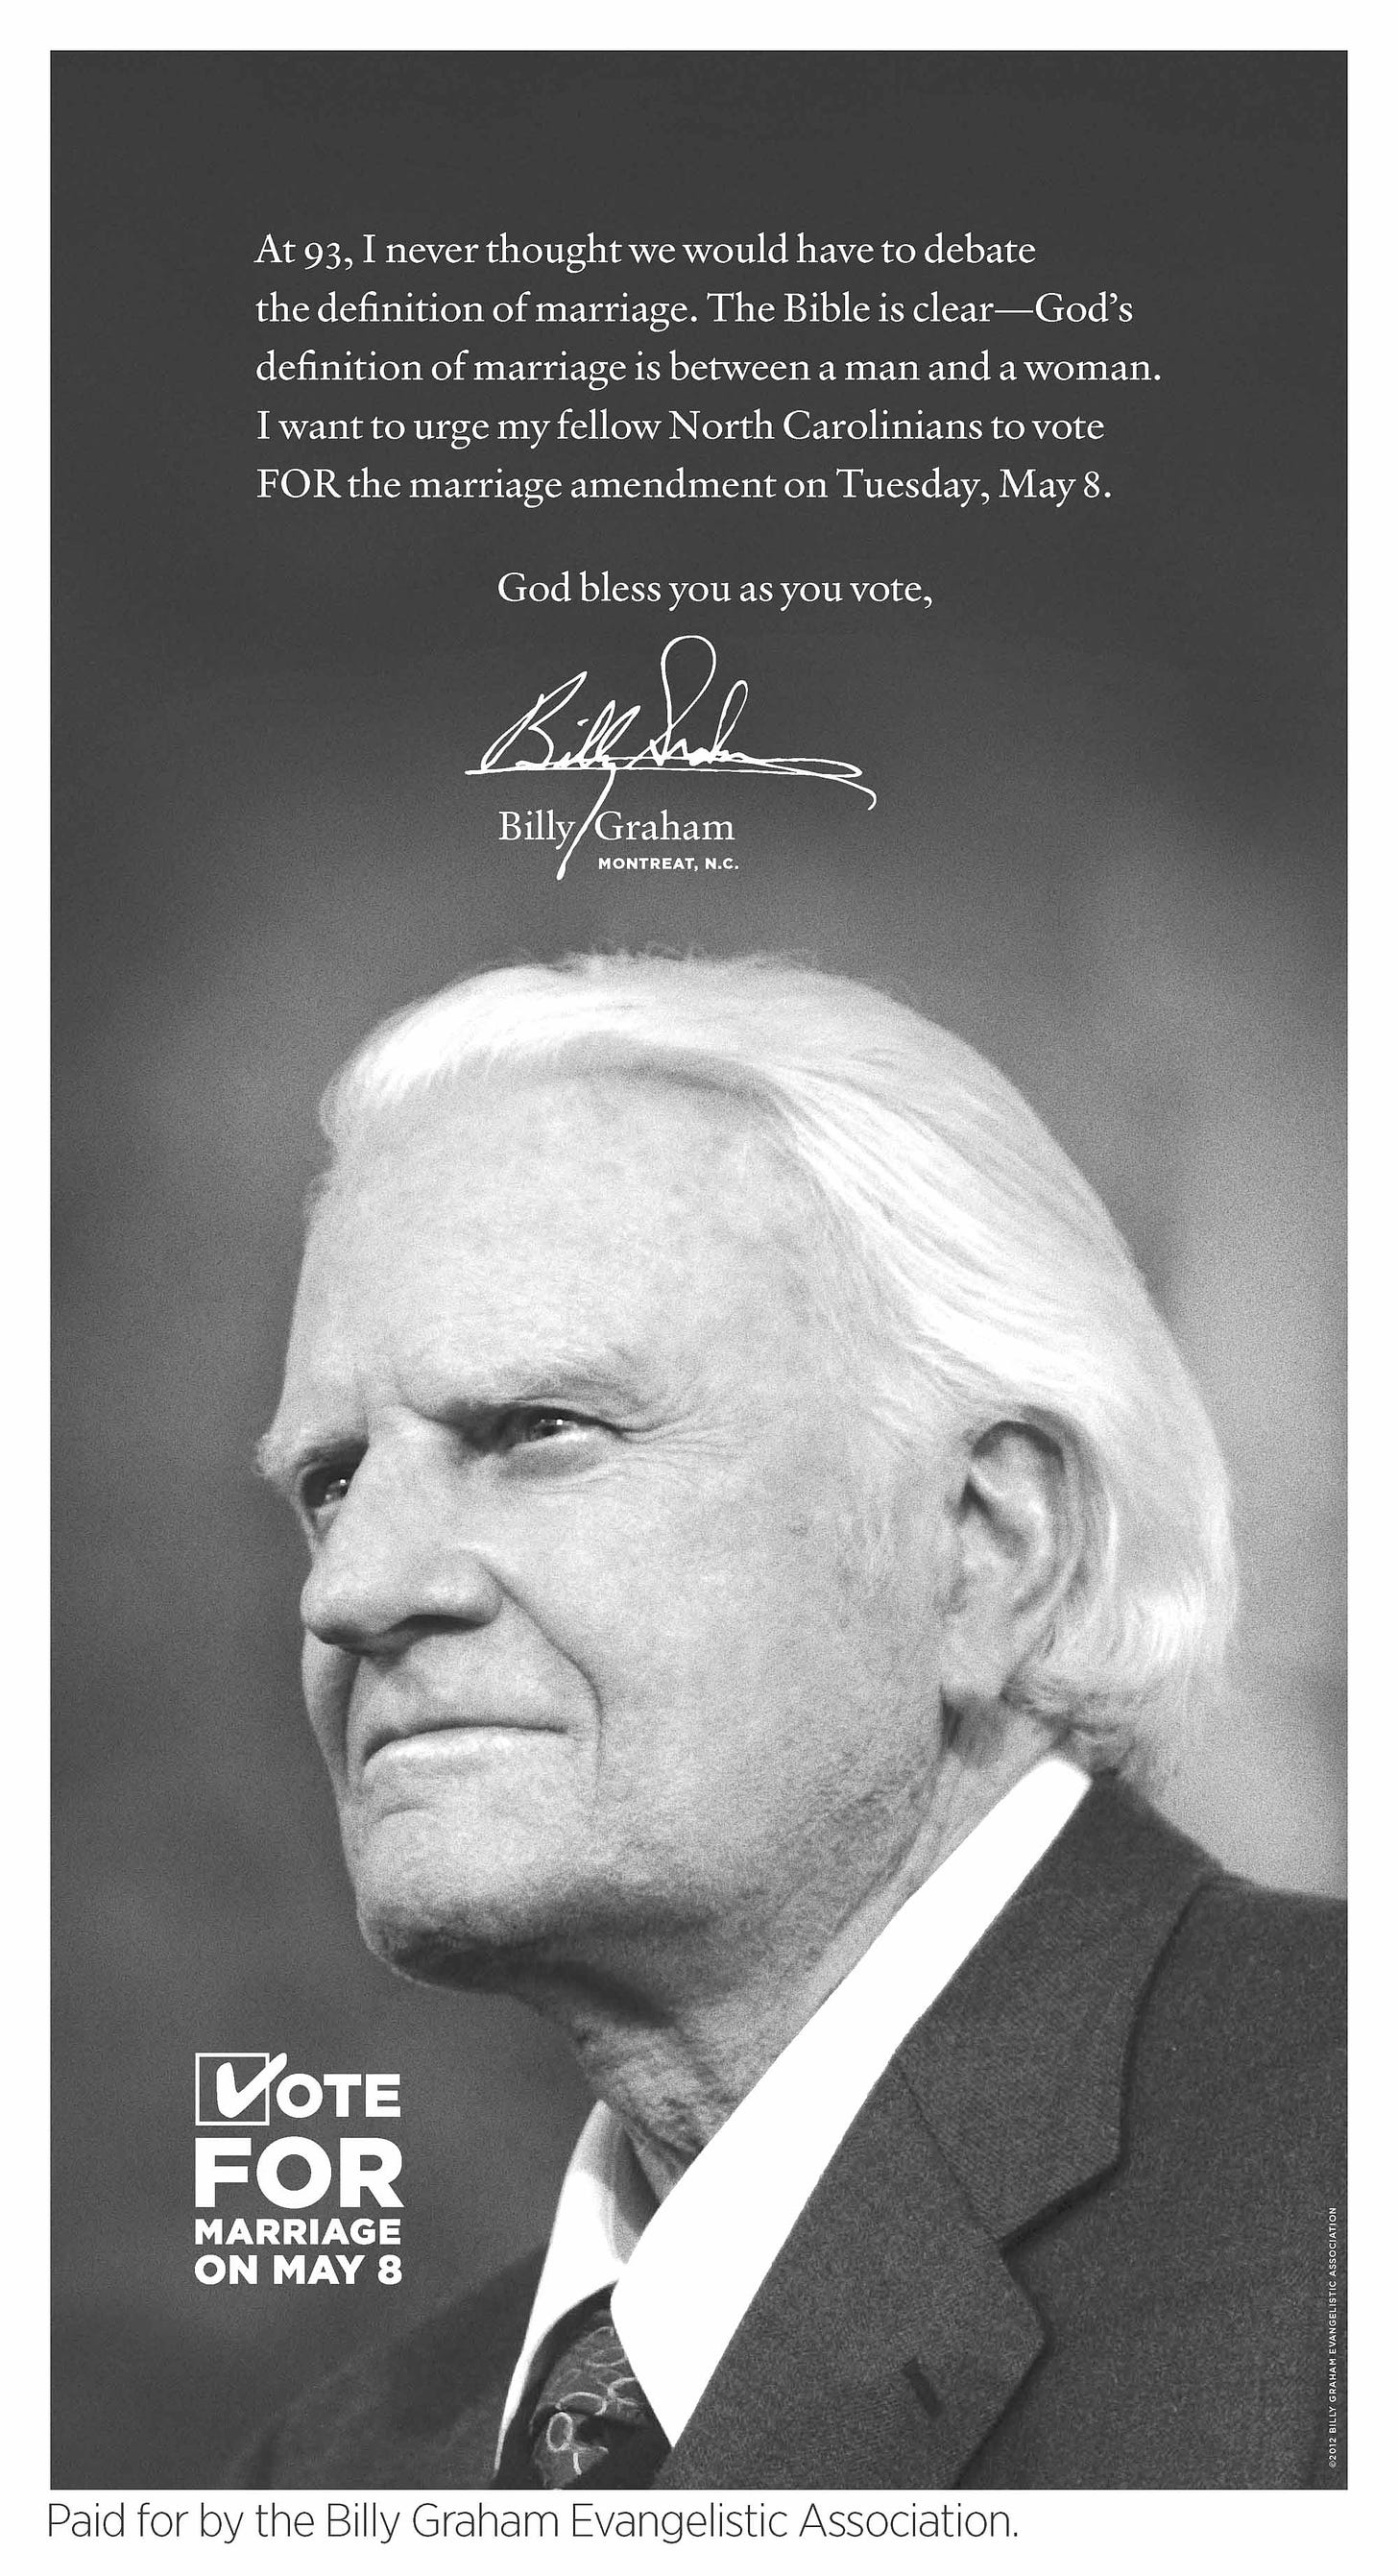 Over a greayscale image of the late Rev. Billy Graham, these words in white text: “At 93, I never thought we would have to debate the definition of marriage. The Bible is clear — God’s definition of marriage is between a man and a woman. I want to urge my fellow North Carolinians to vote for the marriage amendment on Tuesday, May 8. God bless you as you vote.” Below this text is Billy Graham's signature, typed name, and "Montreat, N.C." and a graphic slogan telling voters to Vote for Marriage on May 8. The ad is paid for by the Billy Graham Evangelistic Association.